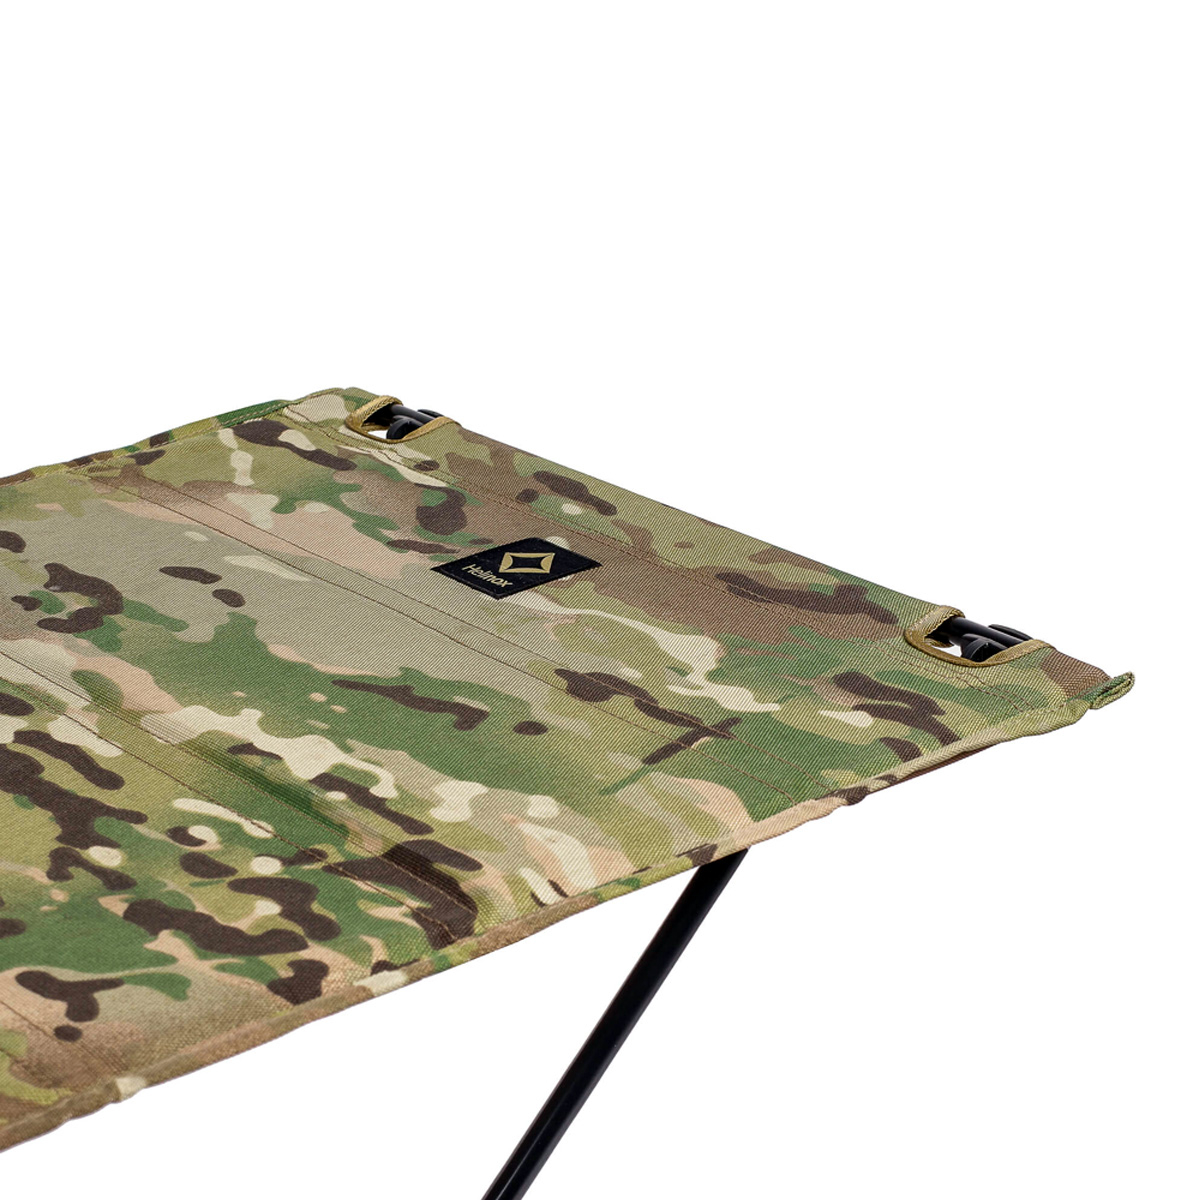 Helinox Tactical Table Regular MultiCam fabric, bluesign®-certified and recycled 600D polyester